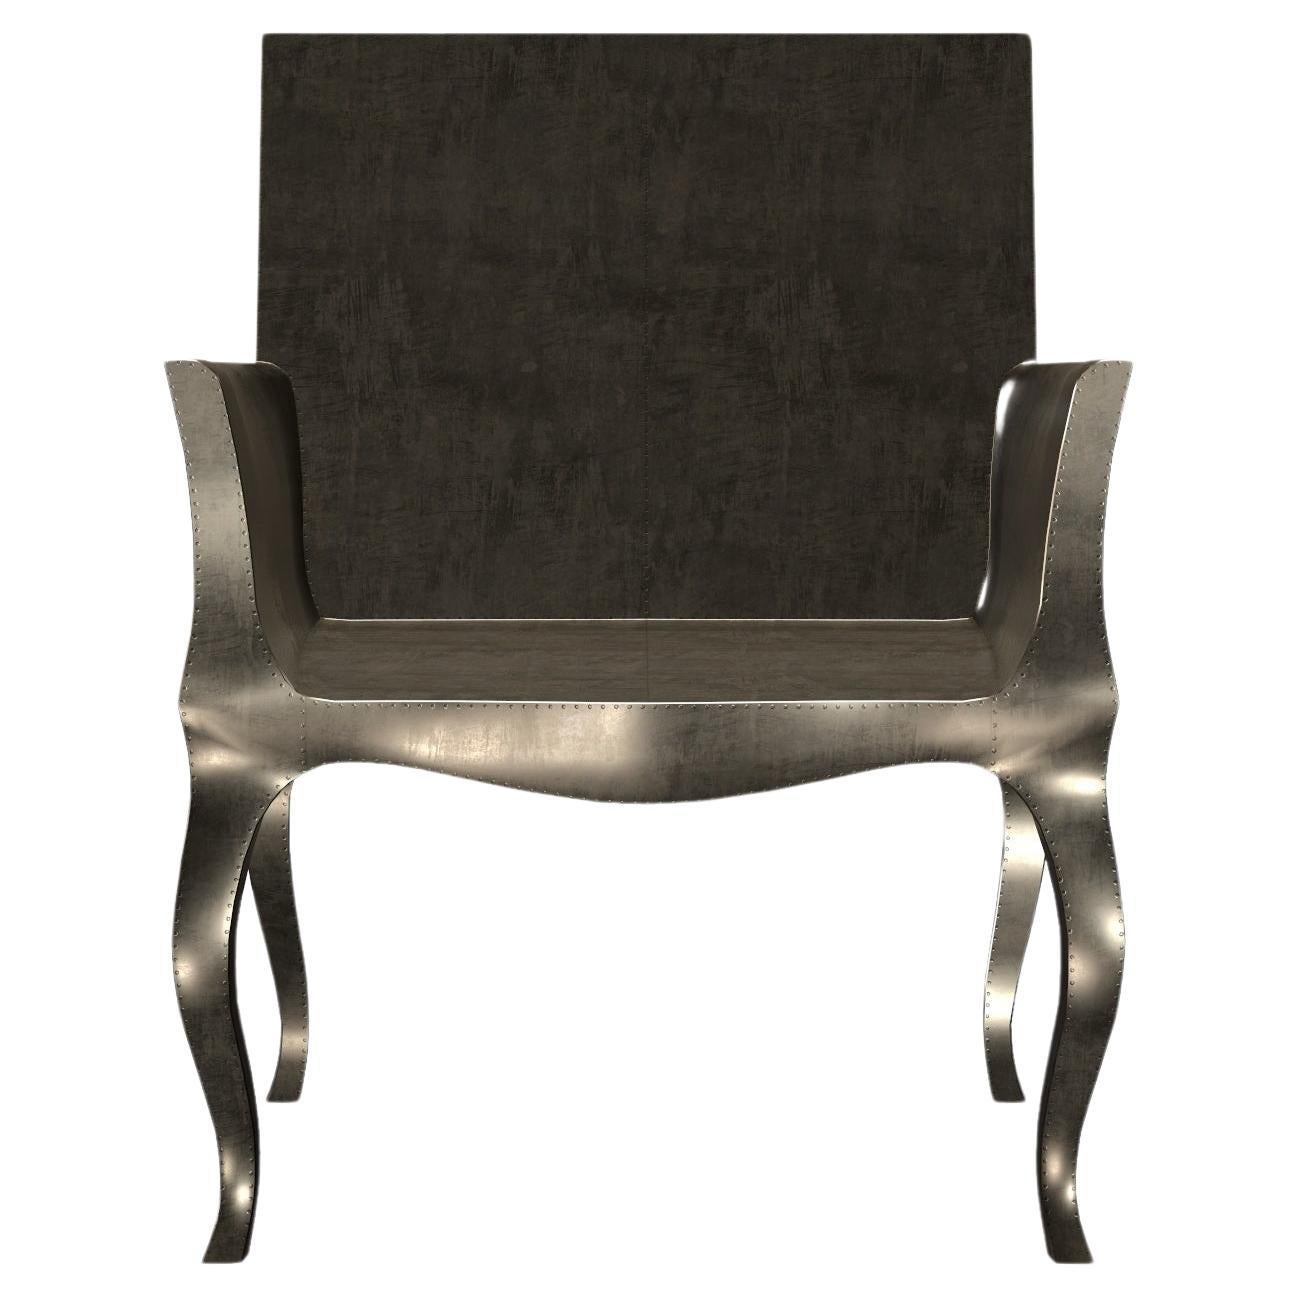 Art Deco Accent Chair Smooth Antique Bronze by Paul Mathieu for S. Odegard